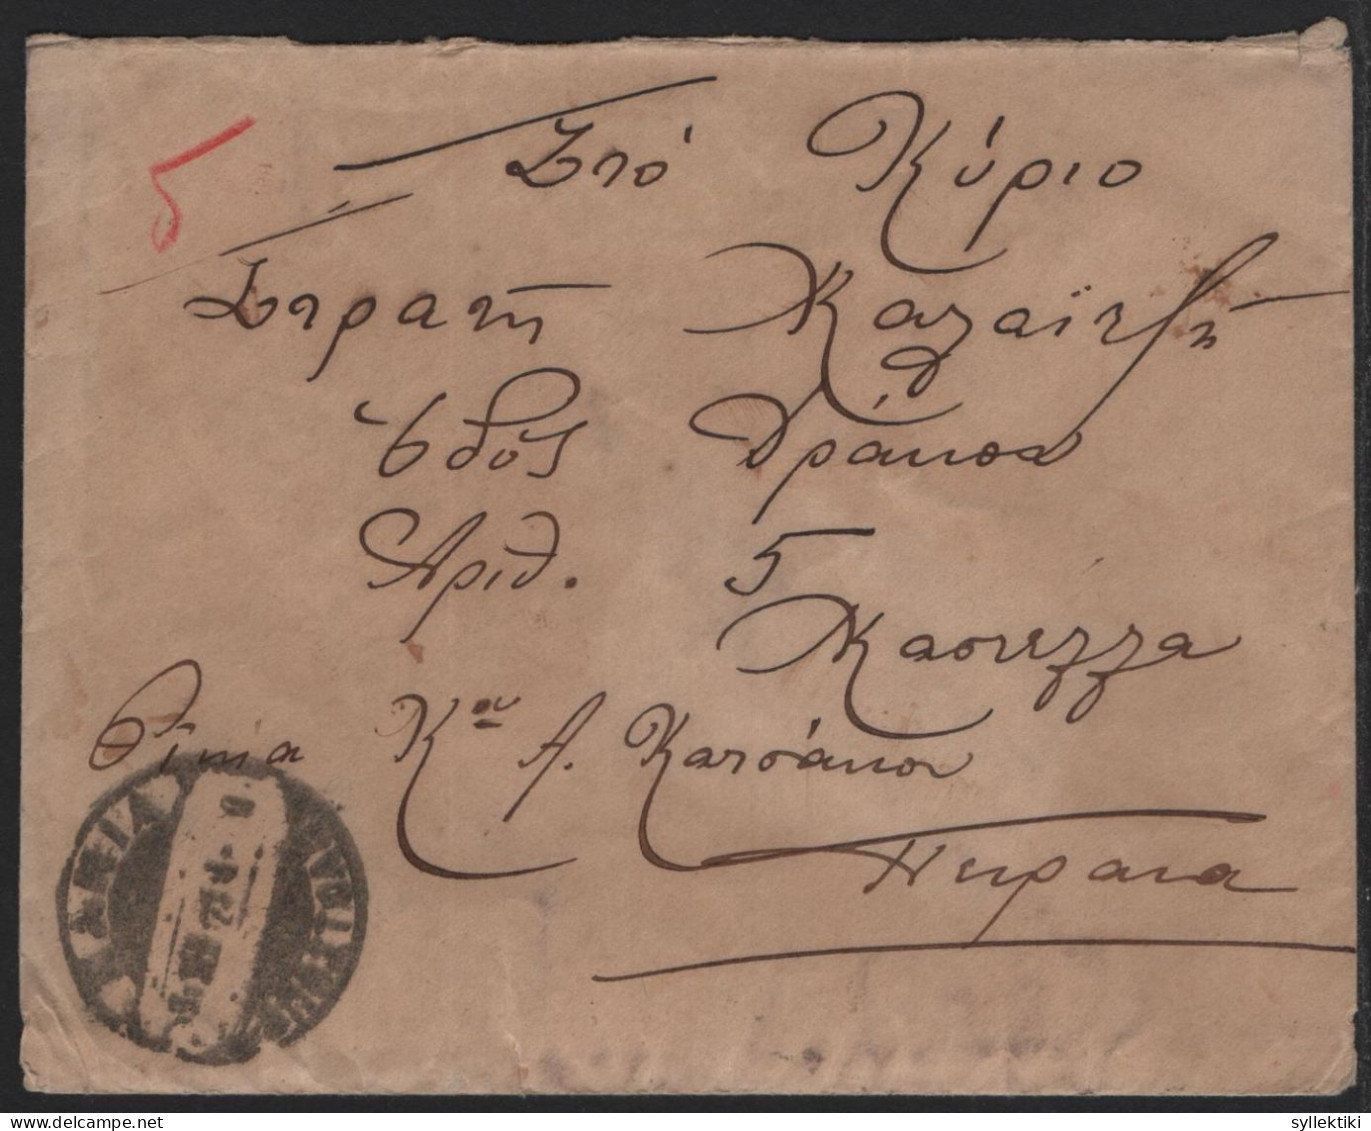 GREECE 1910s MAILED COVER FROM CRETE & 9 STAMPS ON - Covers & Documents